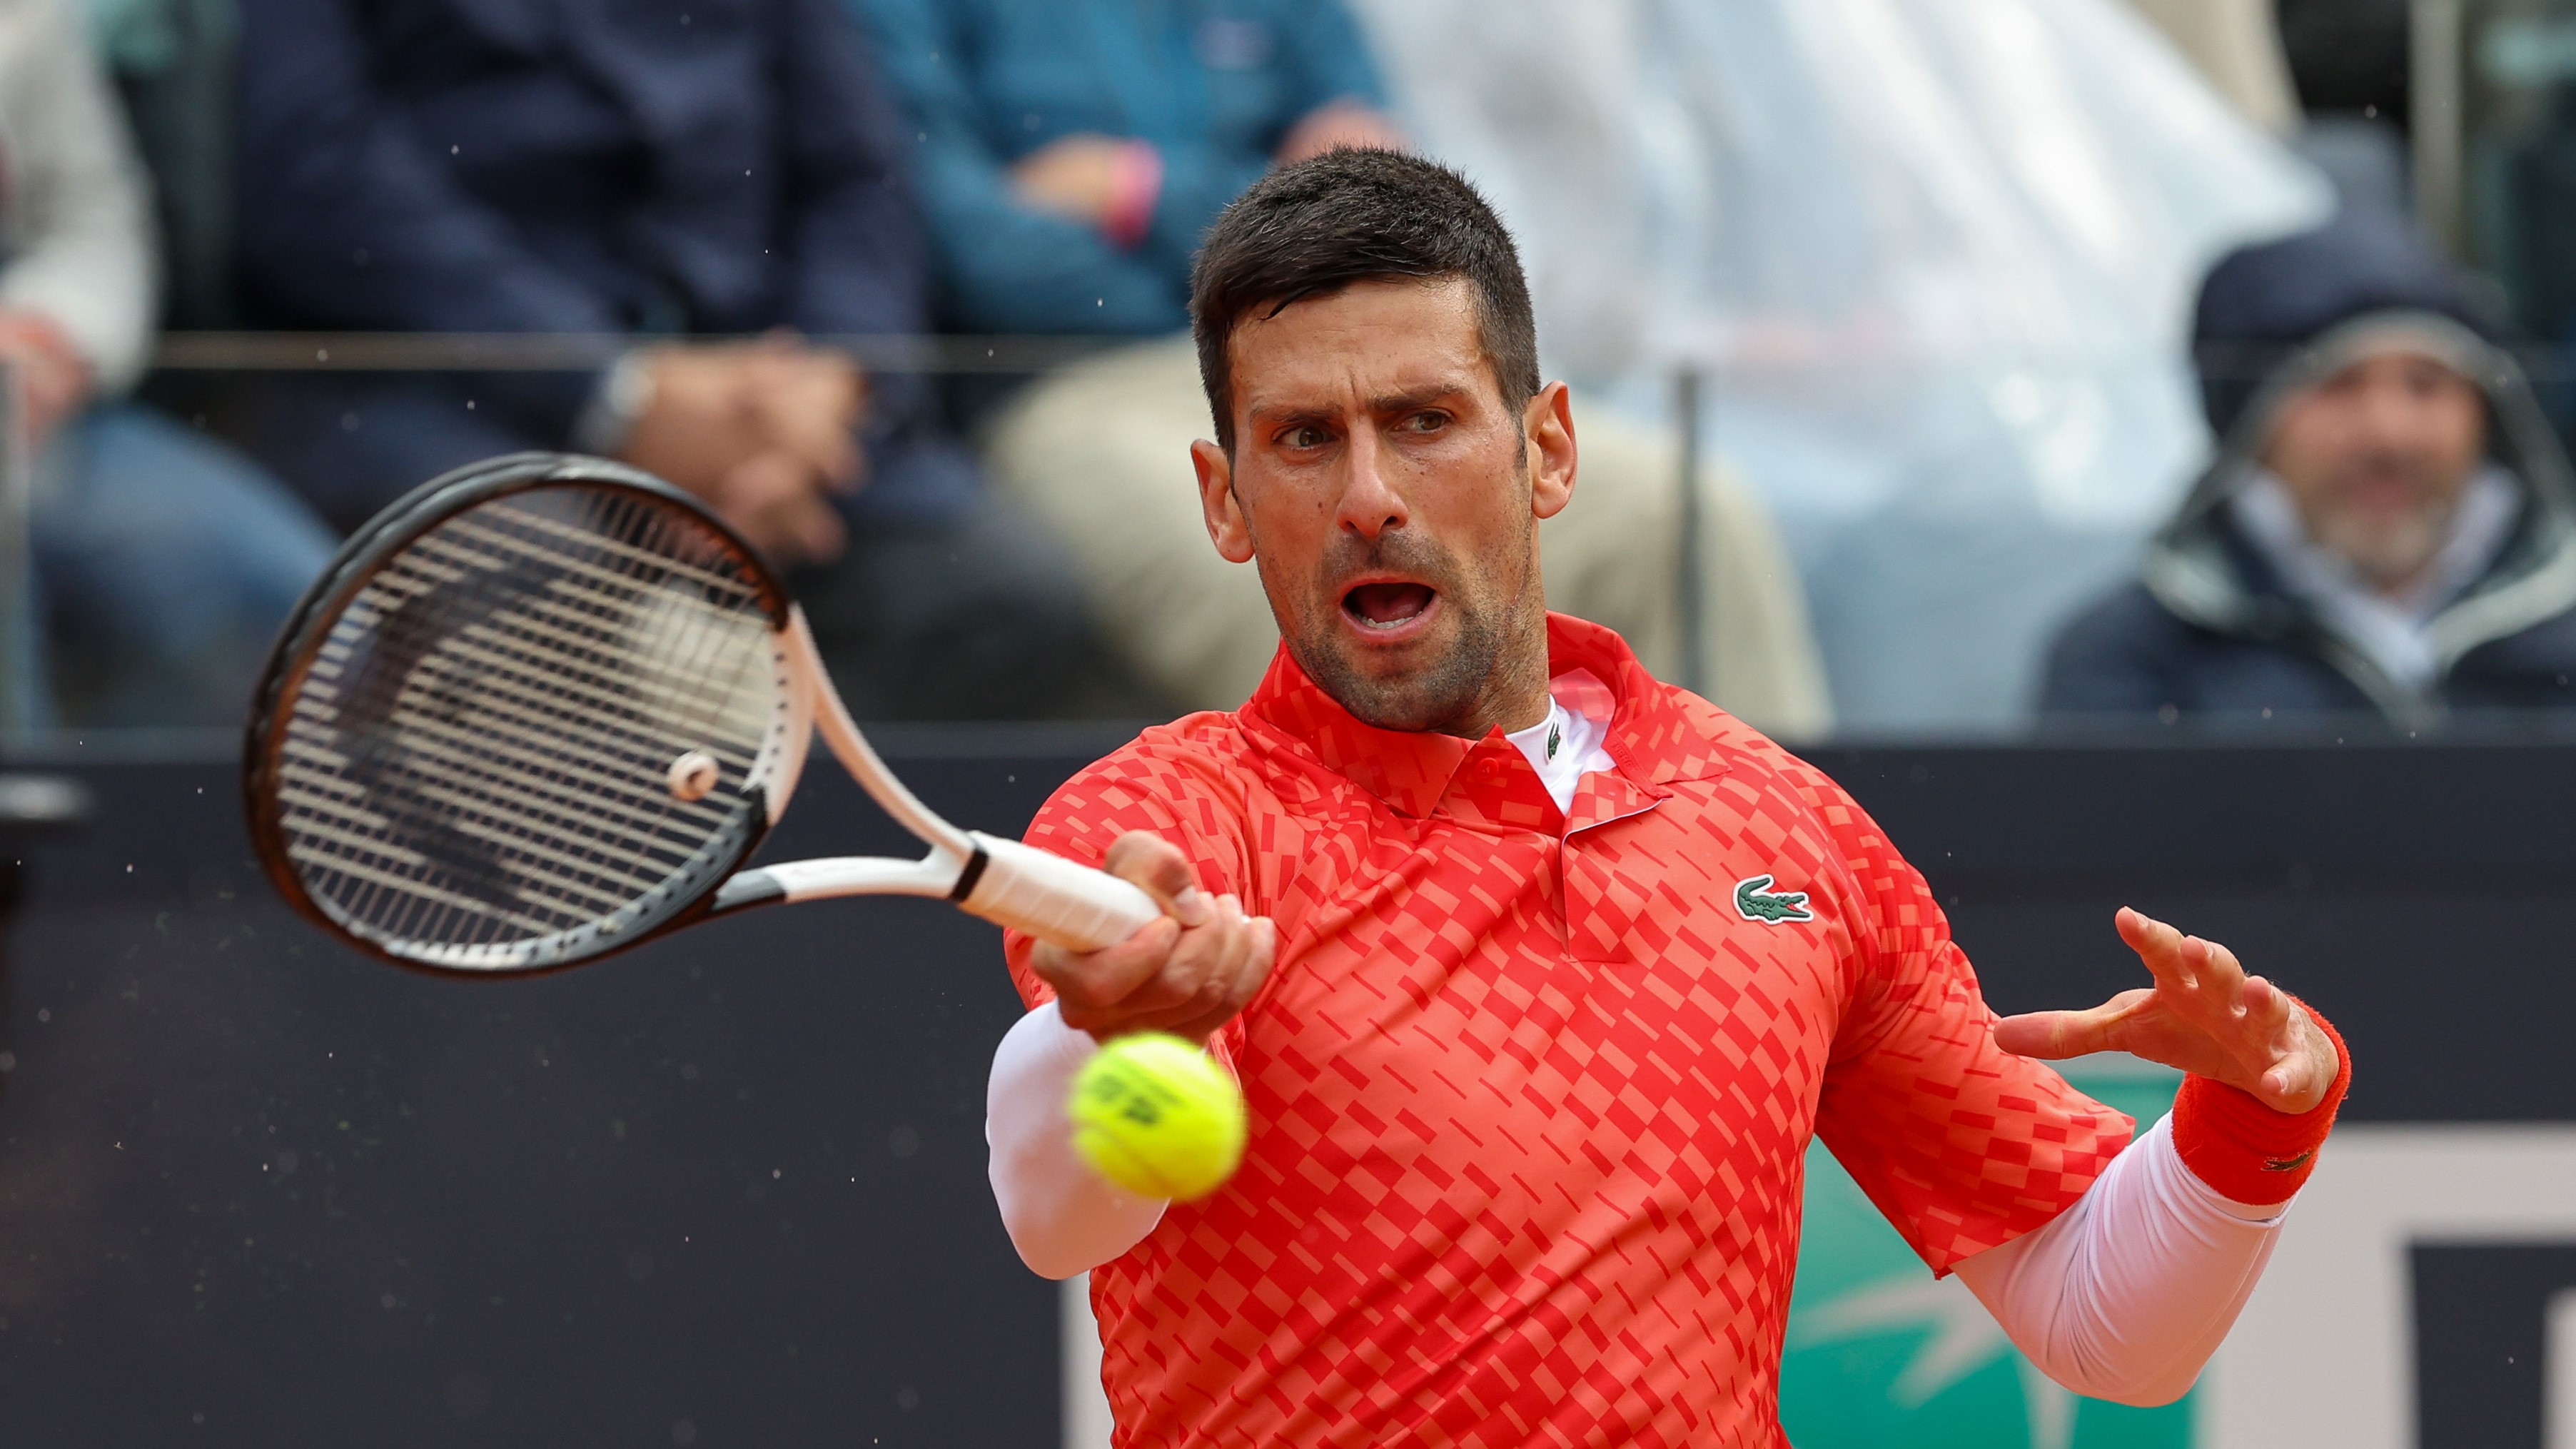 smertefuld Vant til krak How to watch the French Open 2023 online or on TV | What to Watch